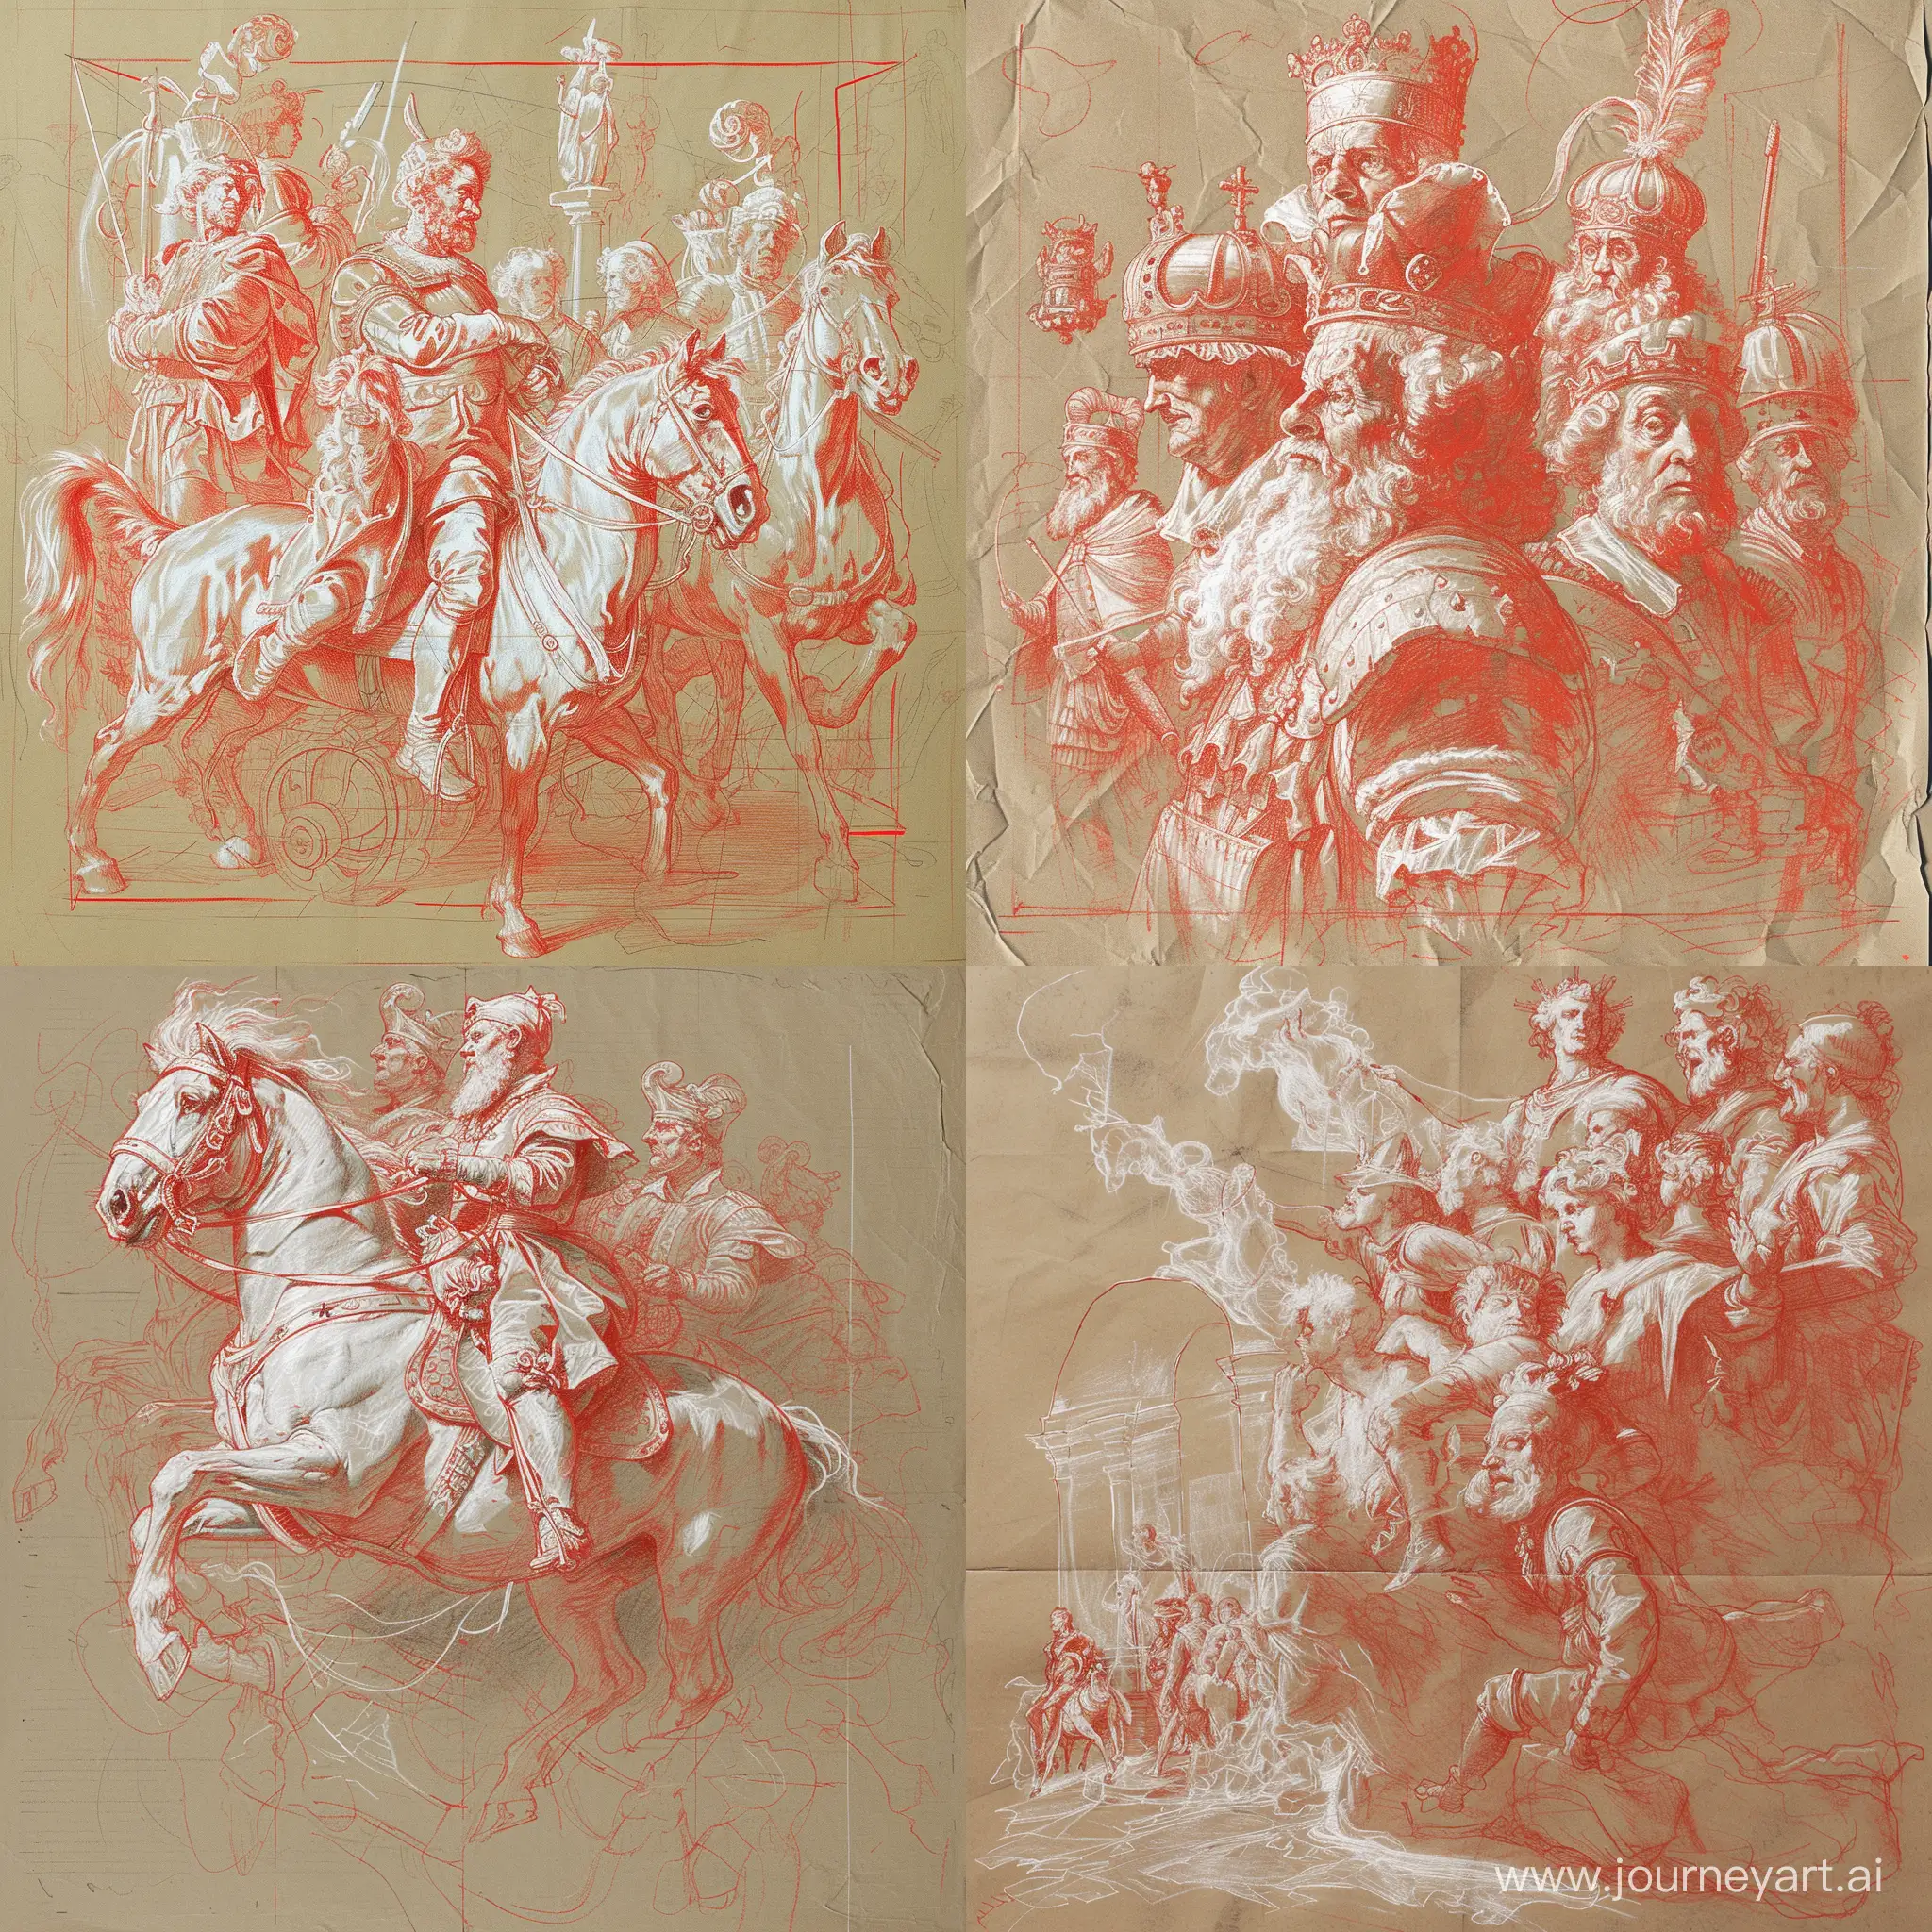 colored pencil draft, sketched in red and white on brown paper, detailed, a study in style of Rubens, in preparation for an historical parade with presentations on floats, in honour of Albreht Durer